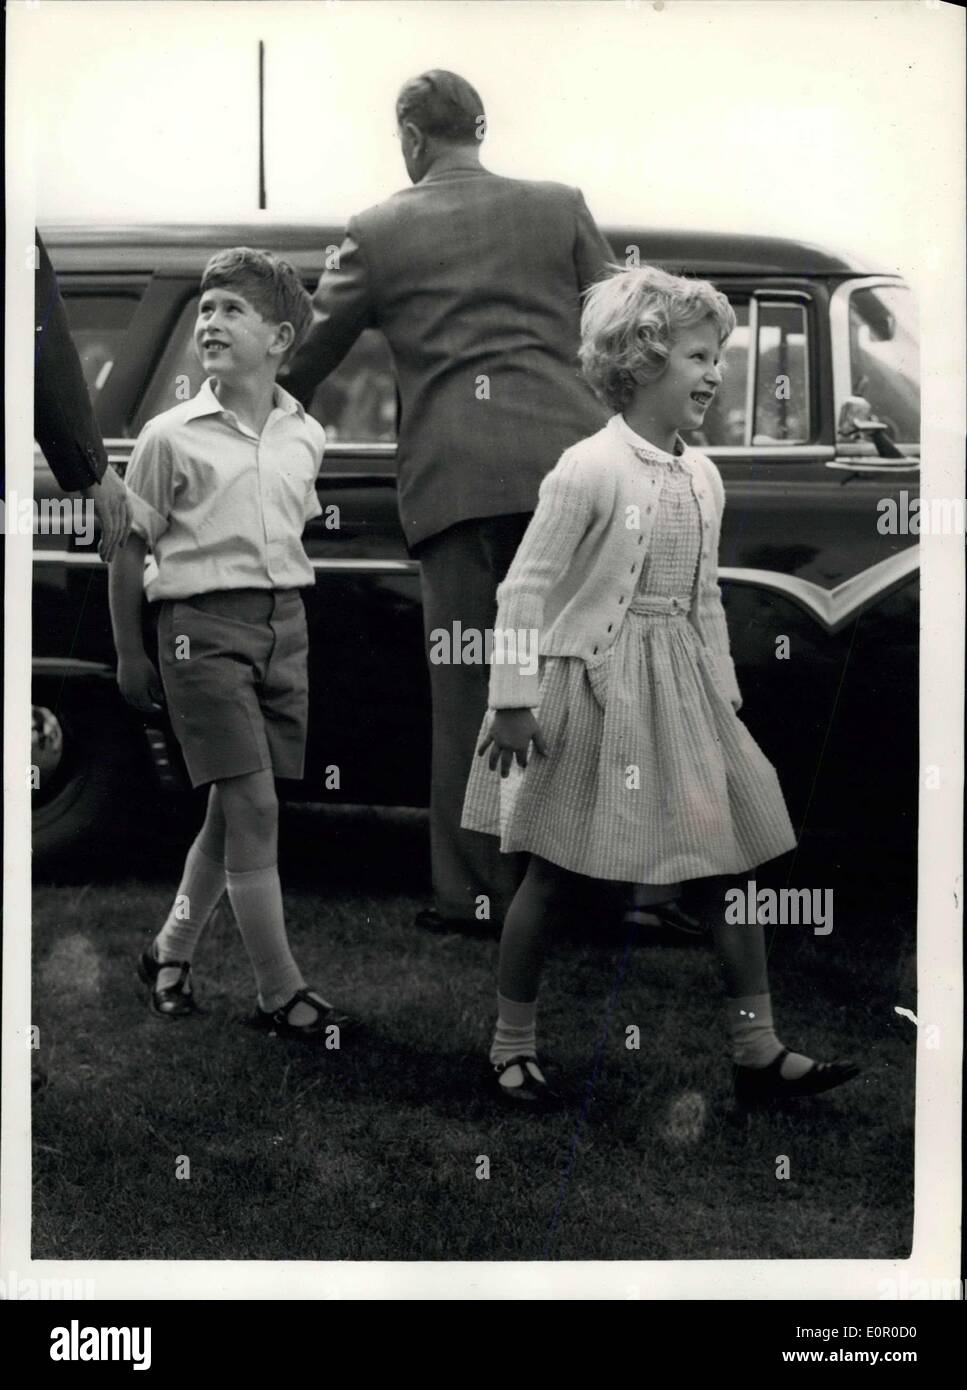 jul-13-1957-prince-charles-and-princess-anne-watch-father-playing-E0R0D0.jpg